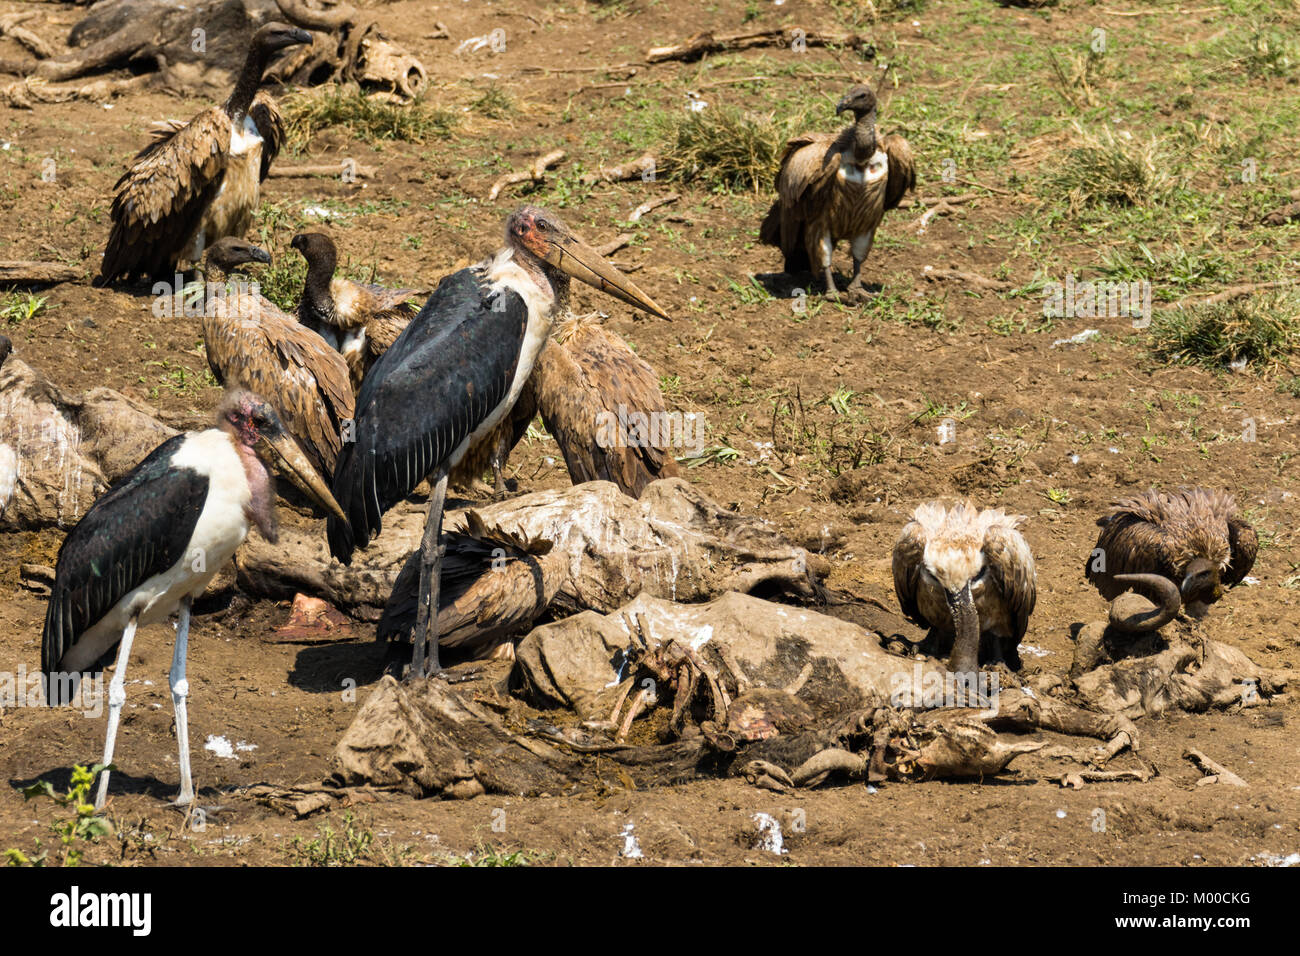 Vultures feast on the carcasses of wildebeest killed at a Mara river crossing during the great migration, Masai Mara, Kenya Stock Photo